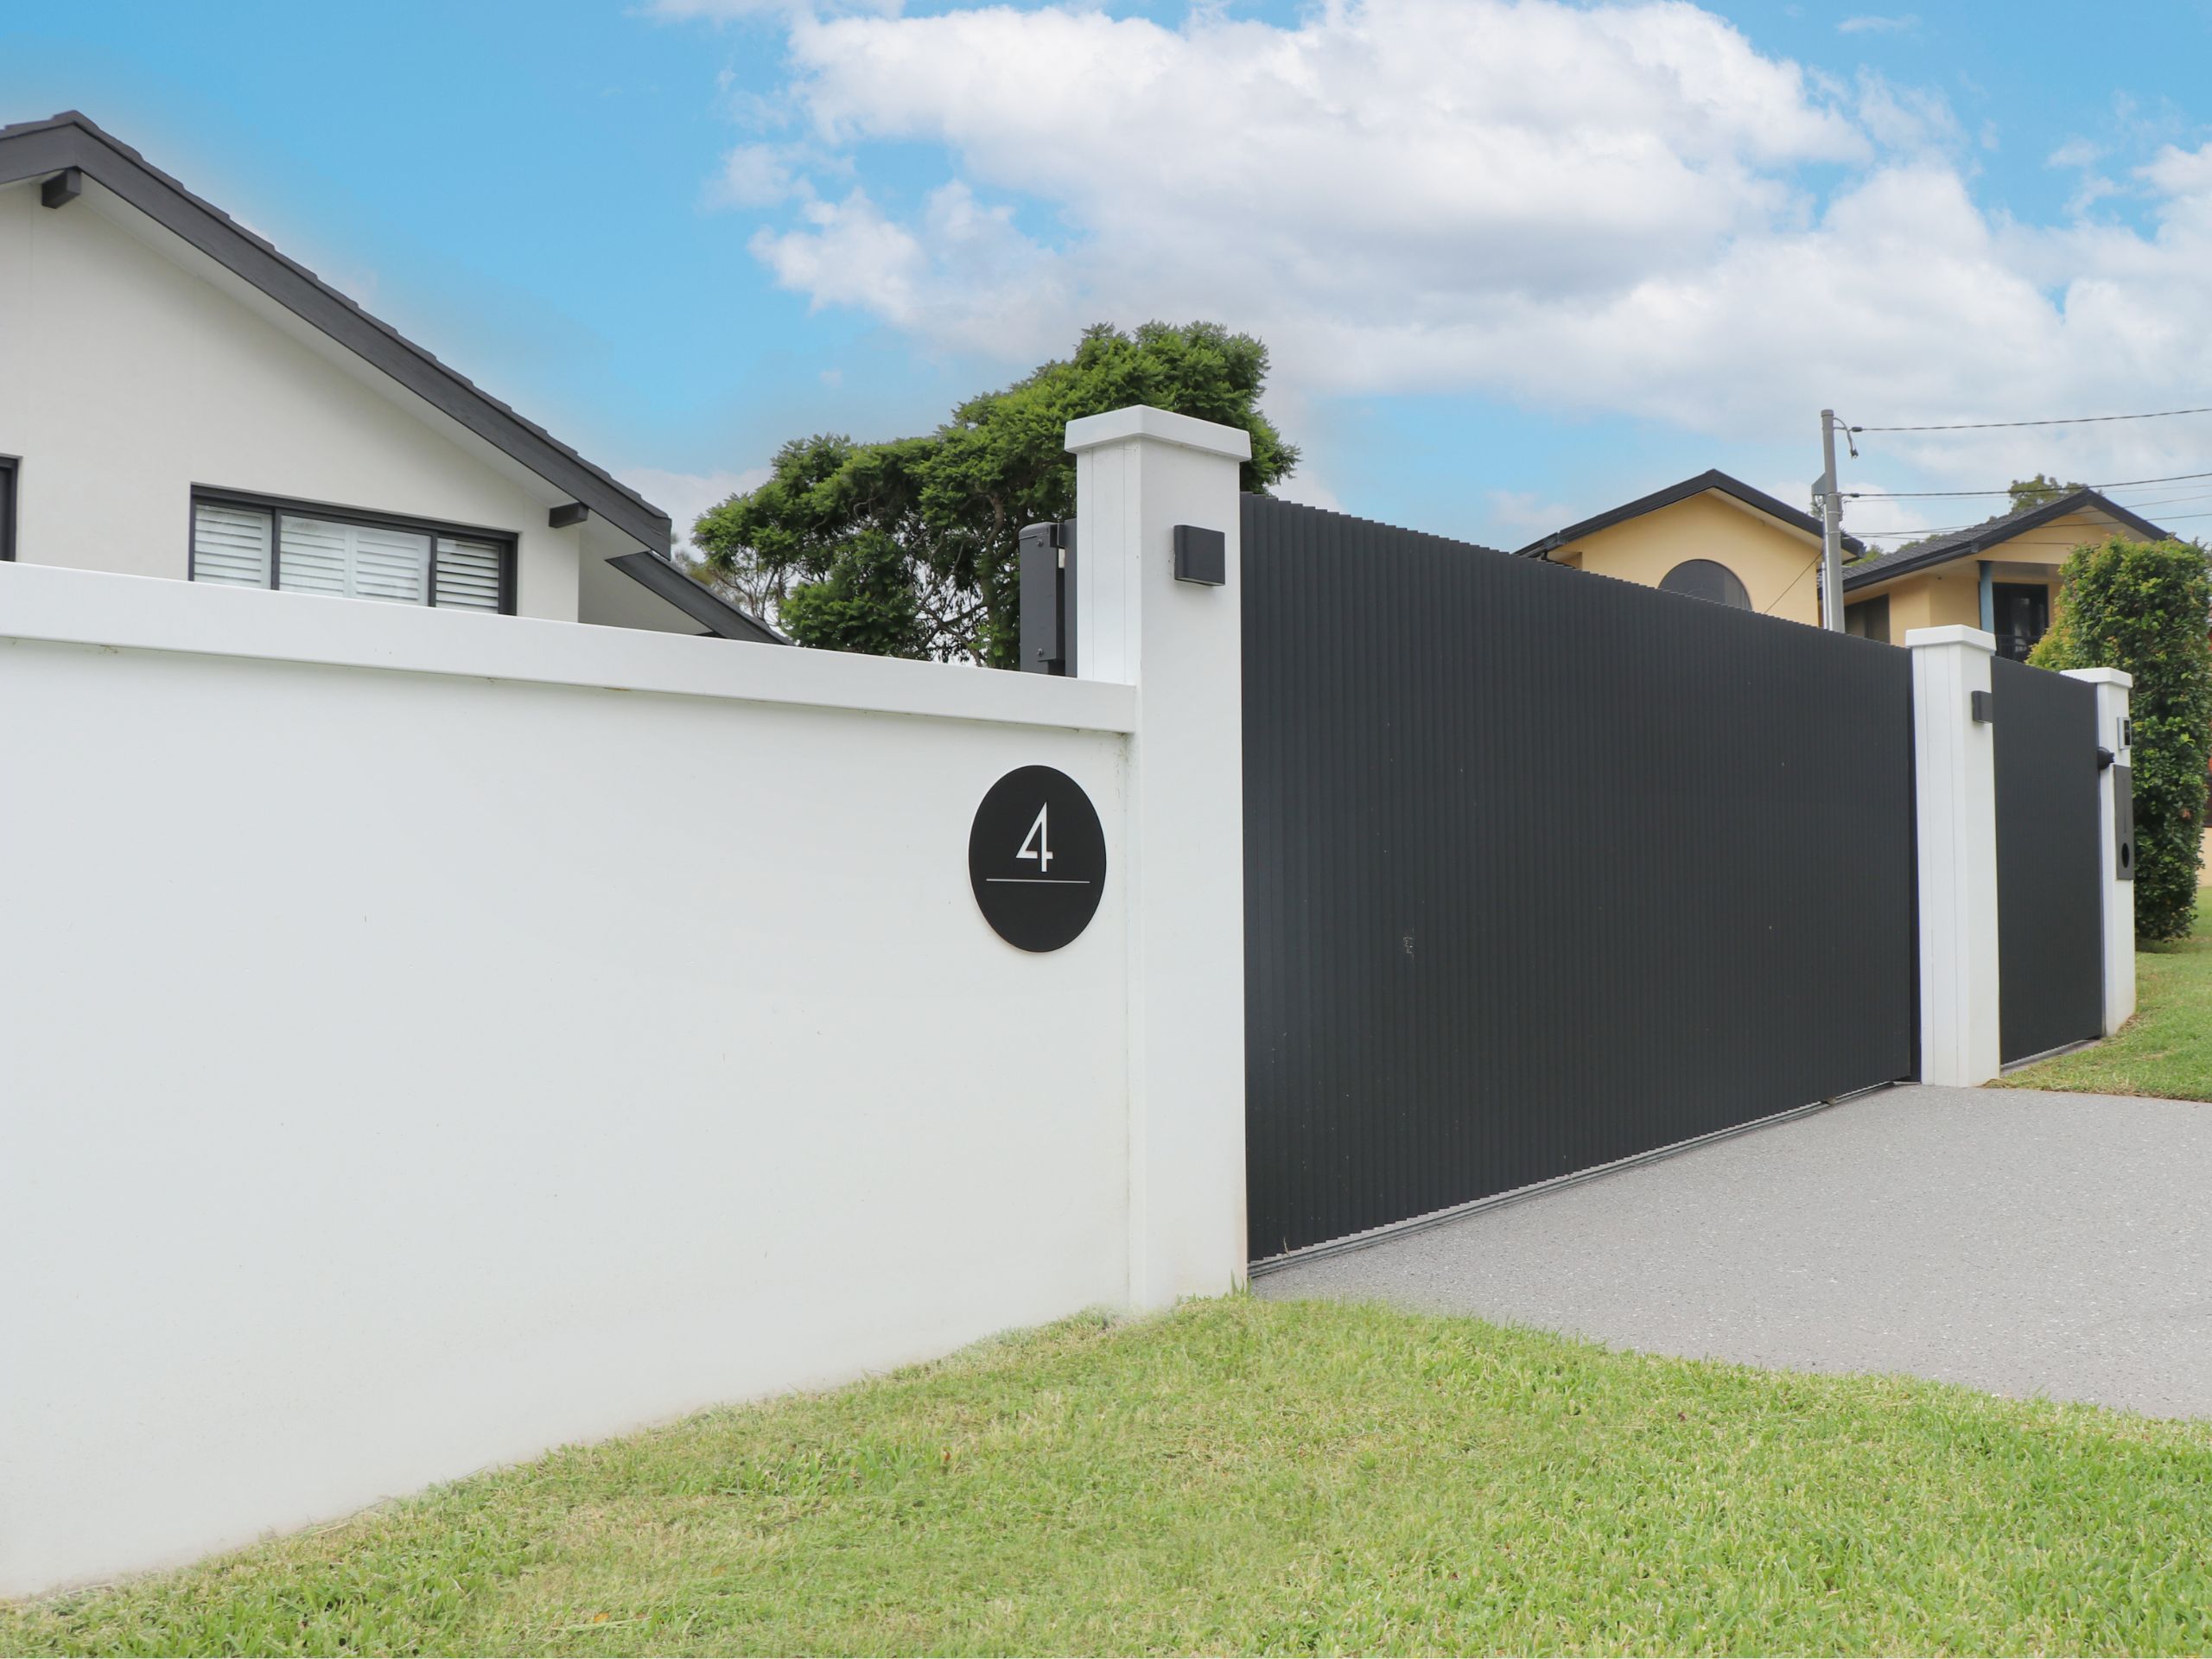 A modern front fence brings security and safety